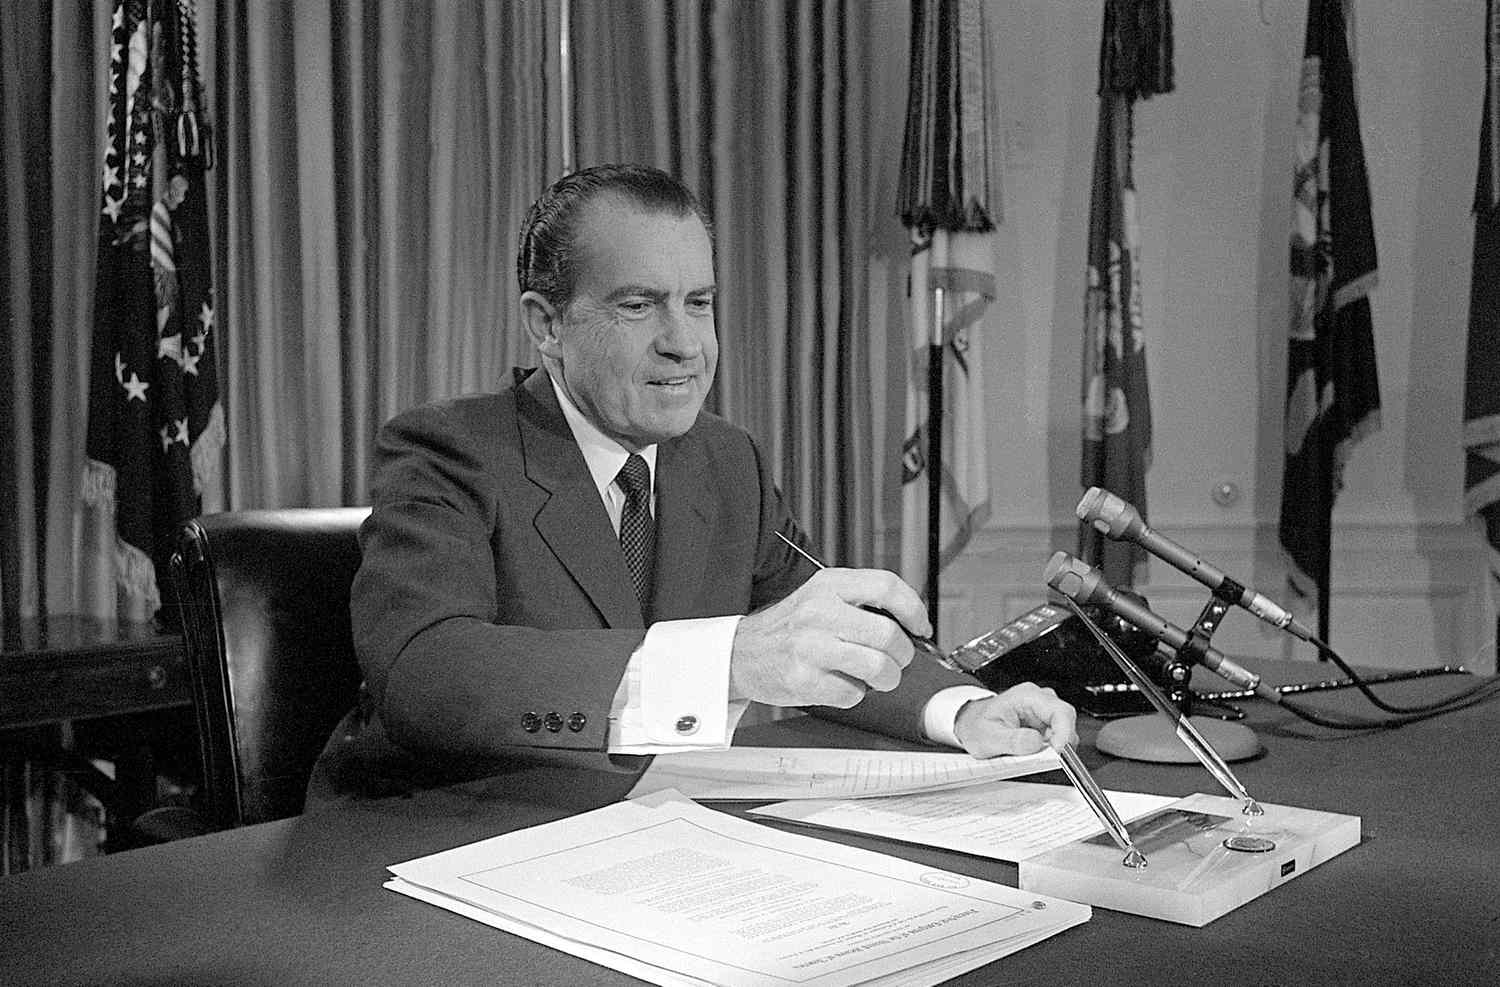 Nixon - The Man who Led Our Nation for Nearly Four Decades
